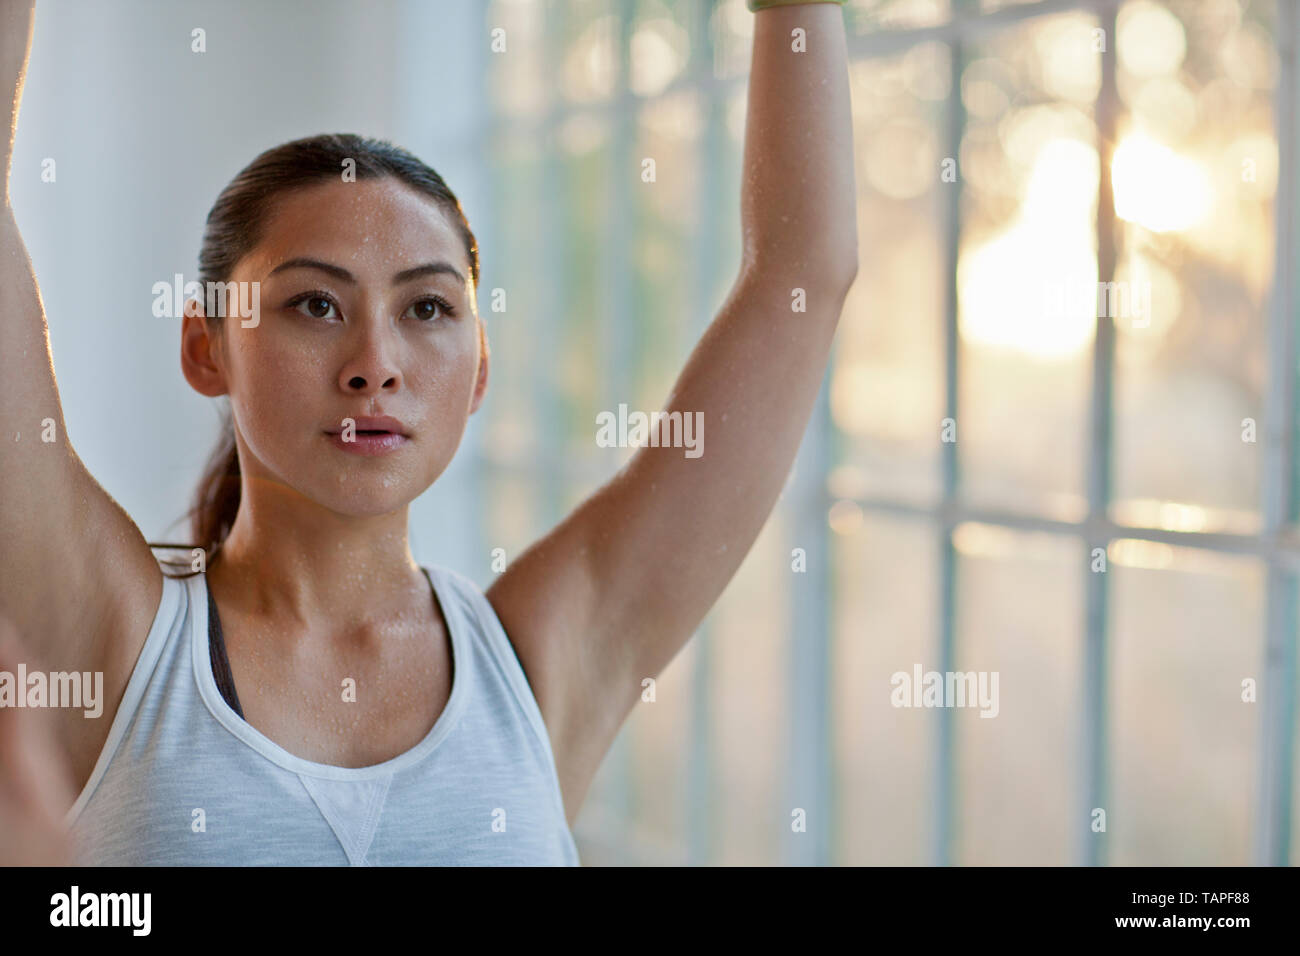 Focused young woman stretching her arms while practicing yoga. Stock Photo